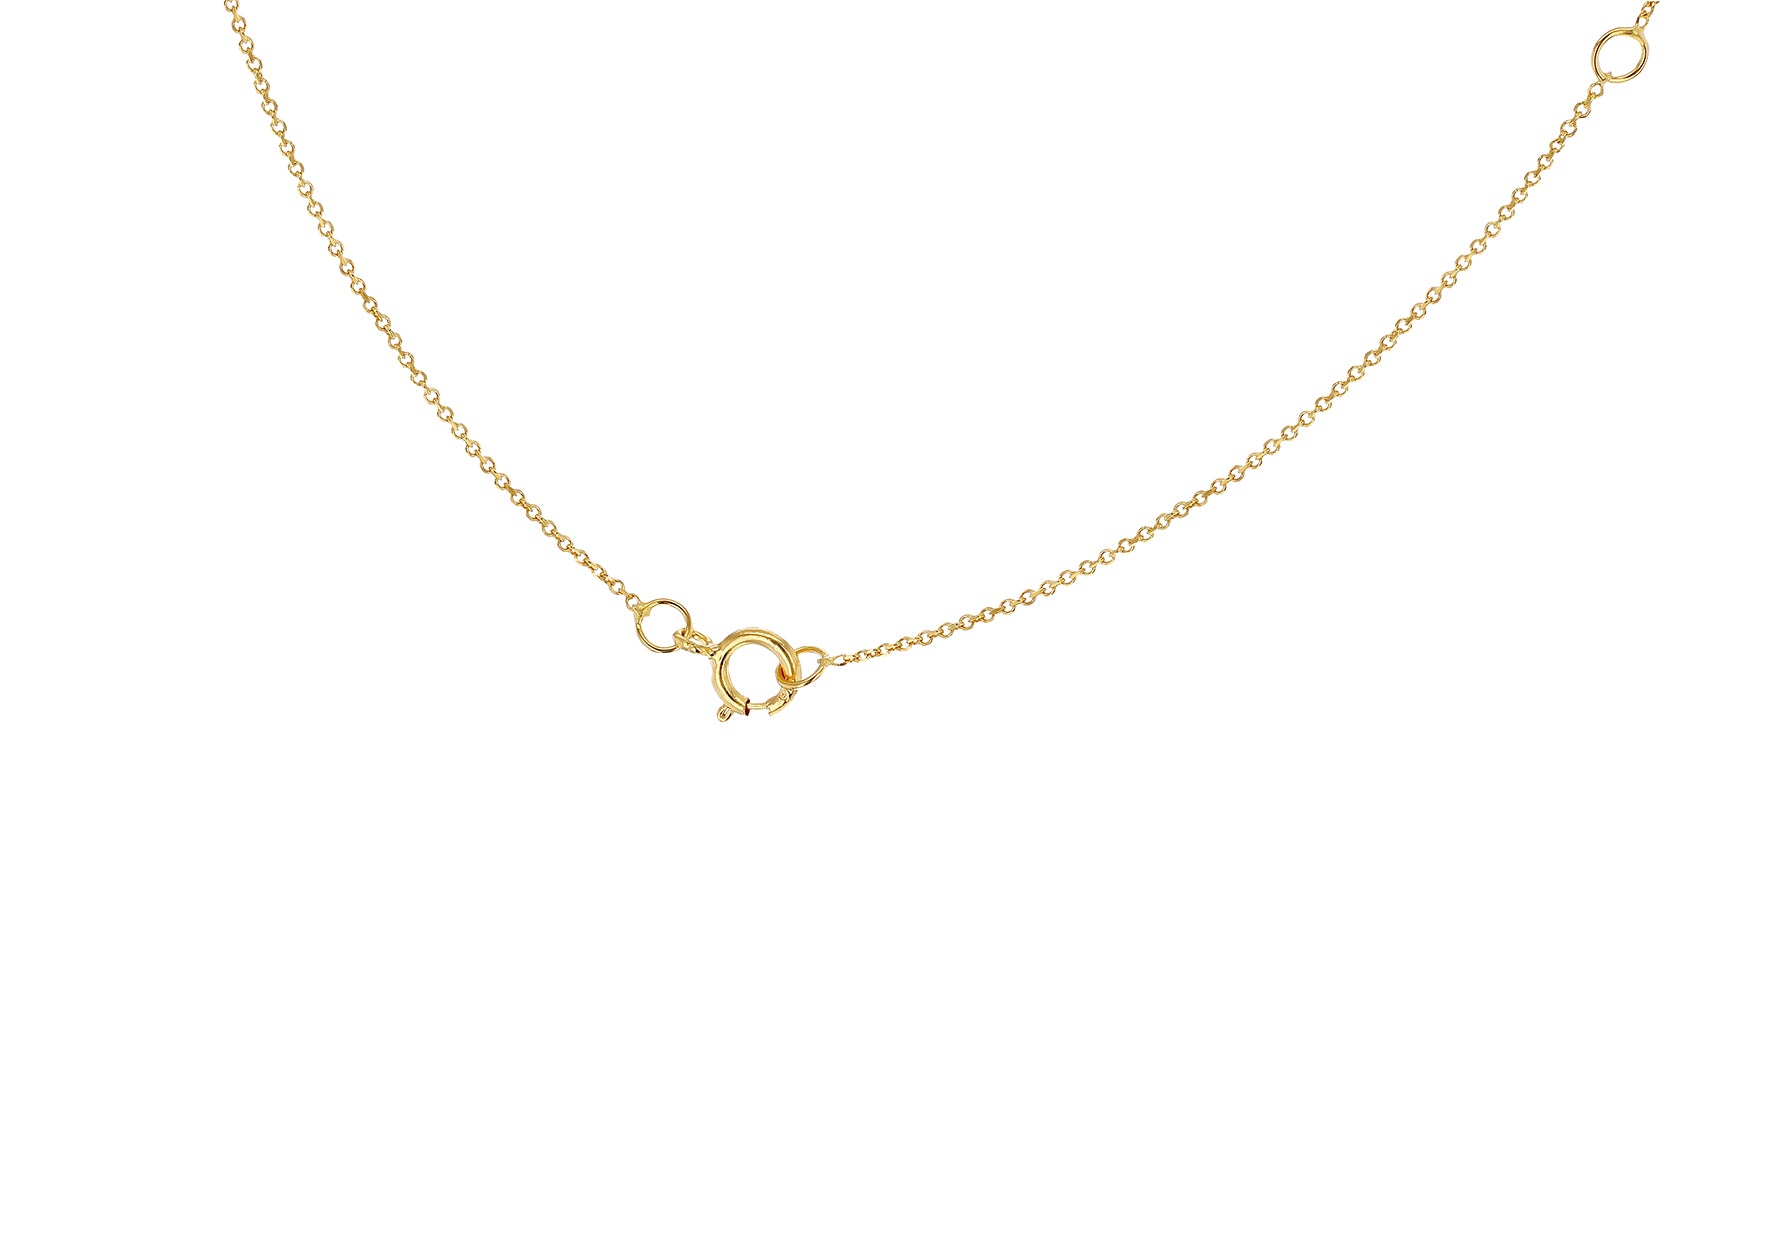 9ct Yellow Gold Plain Single Initial G Necklace